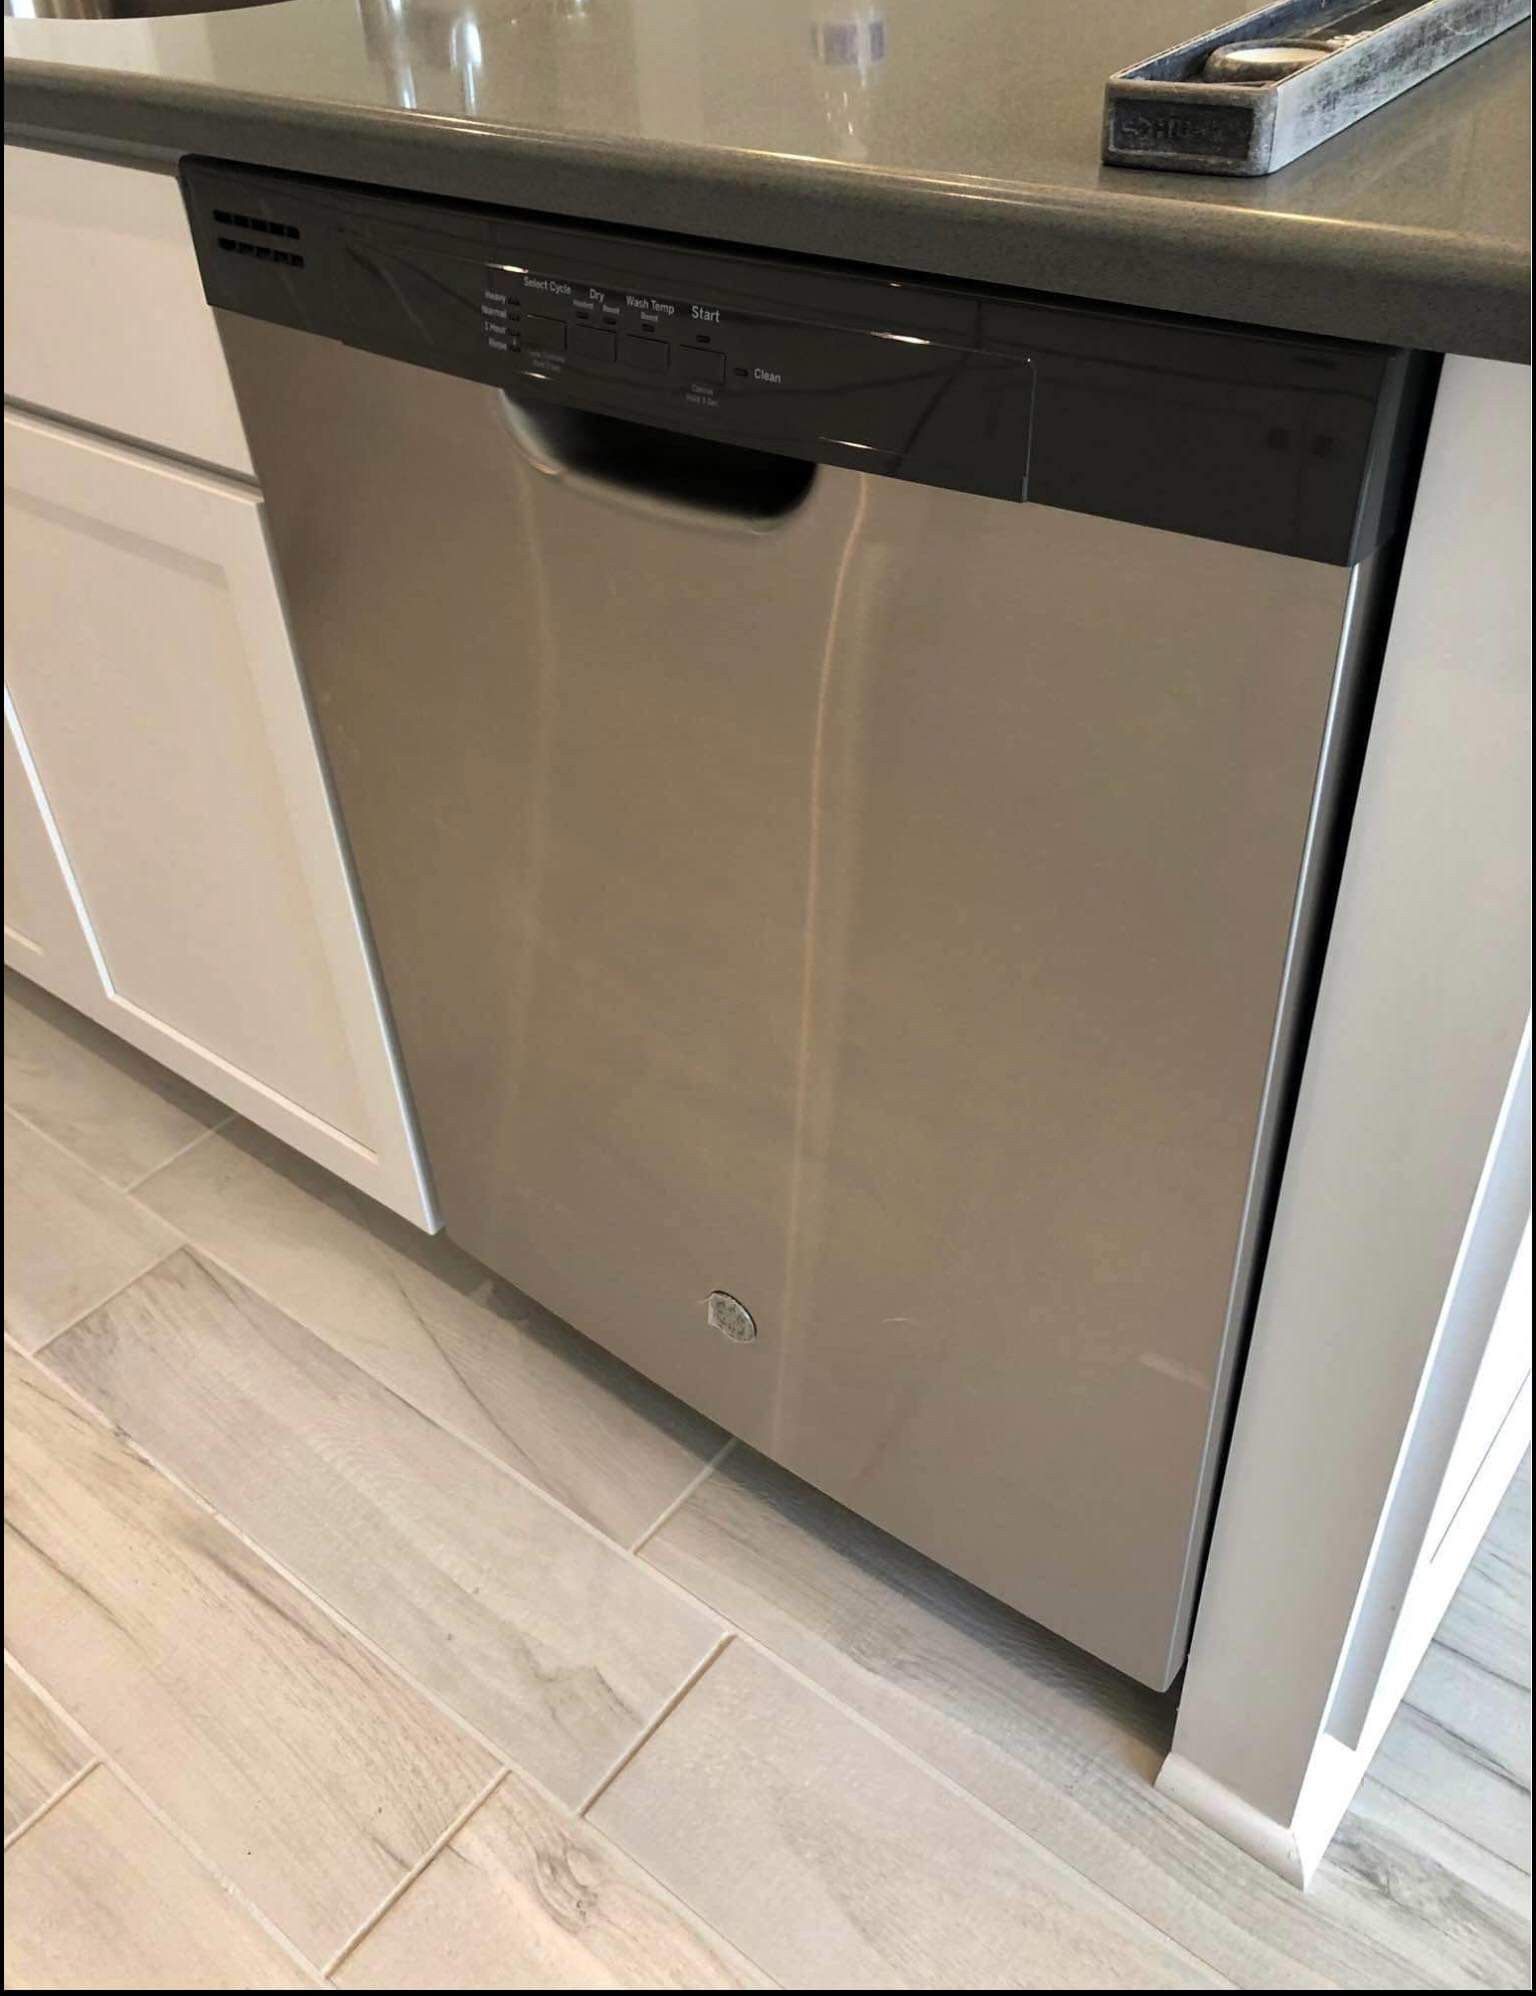 Stainless steel dishwasher for sale